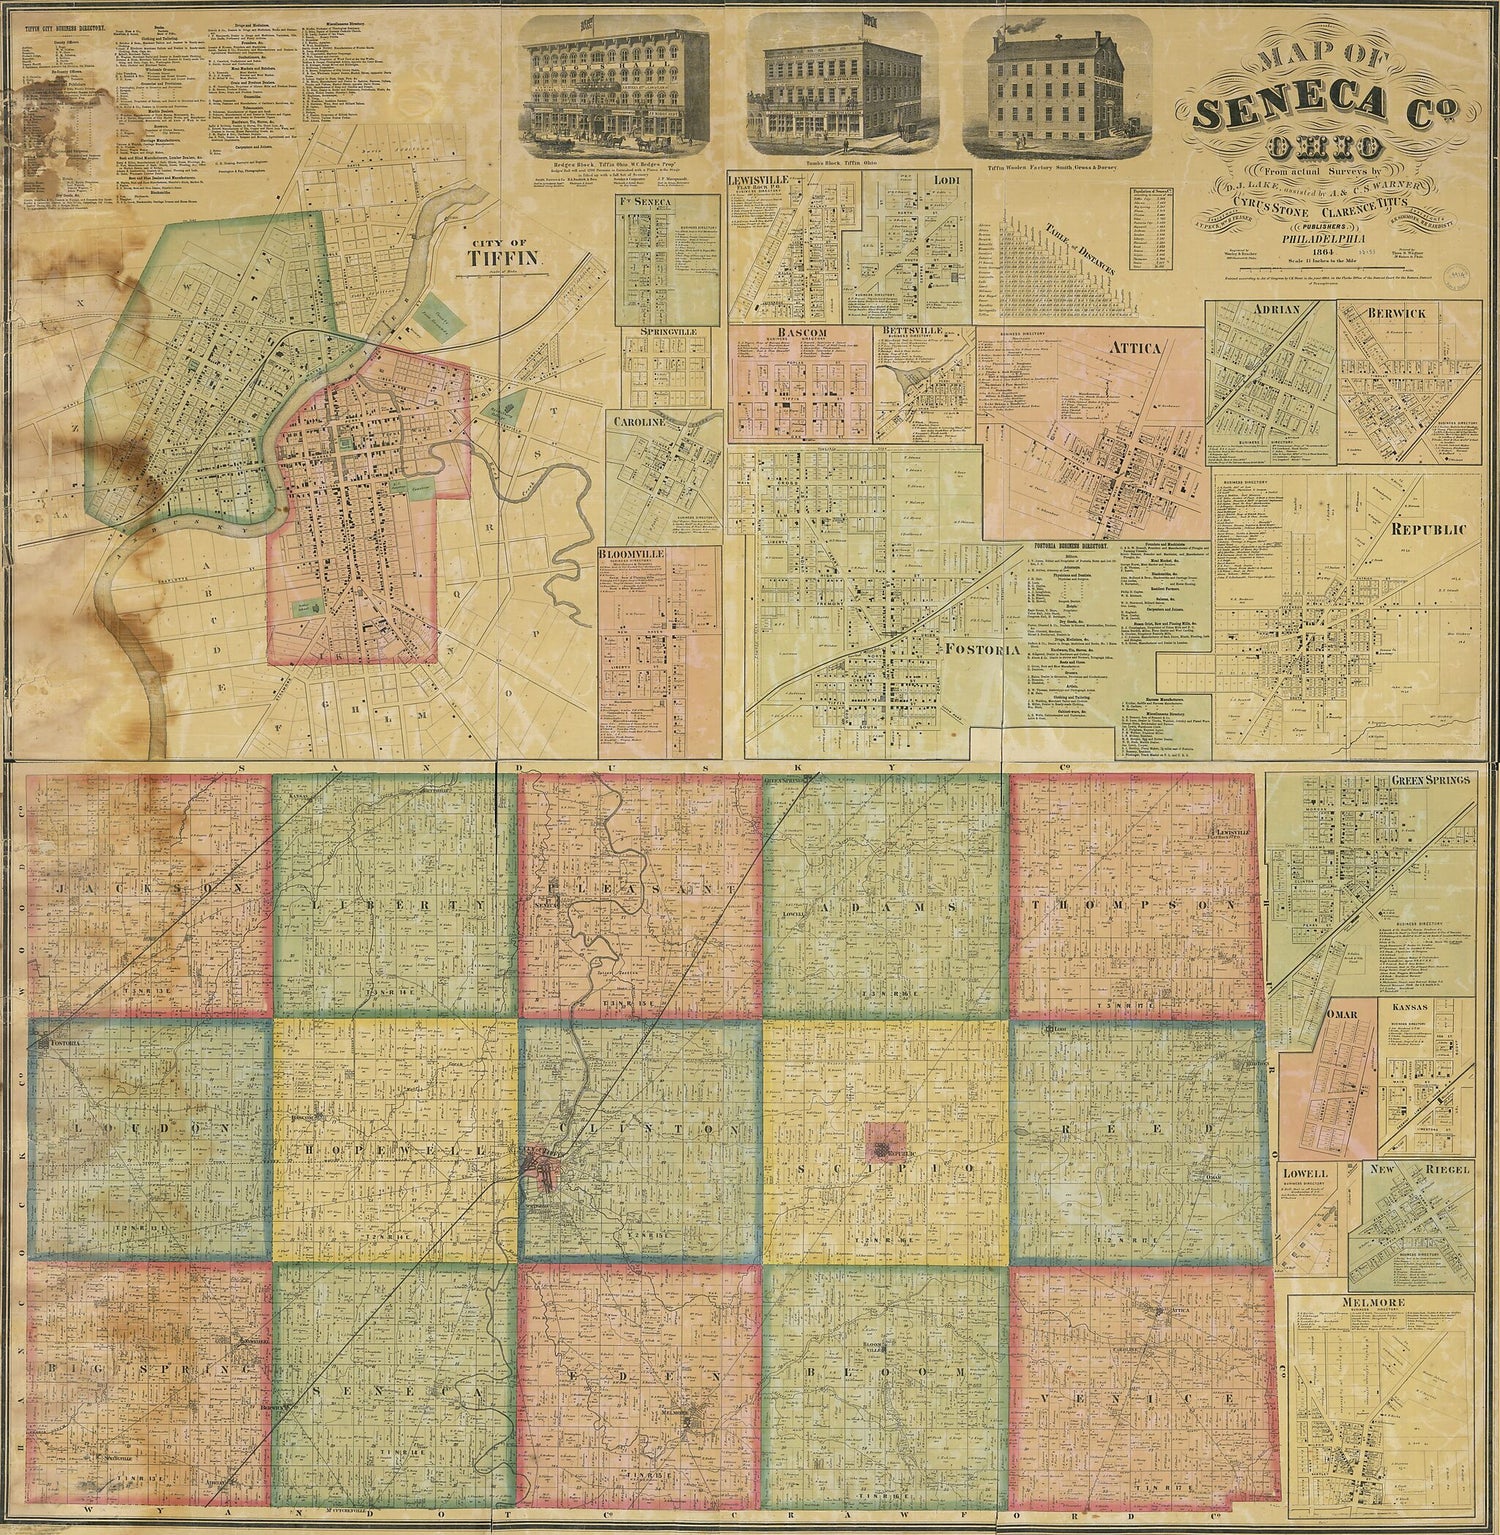 This old map of Map of Seneca County, Ohio from 1864 was created by D. J. Lake in 1864